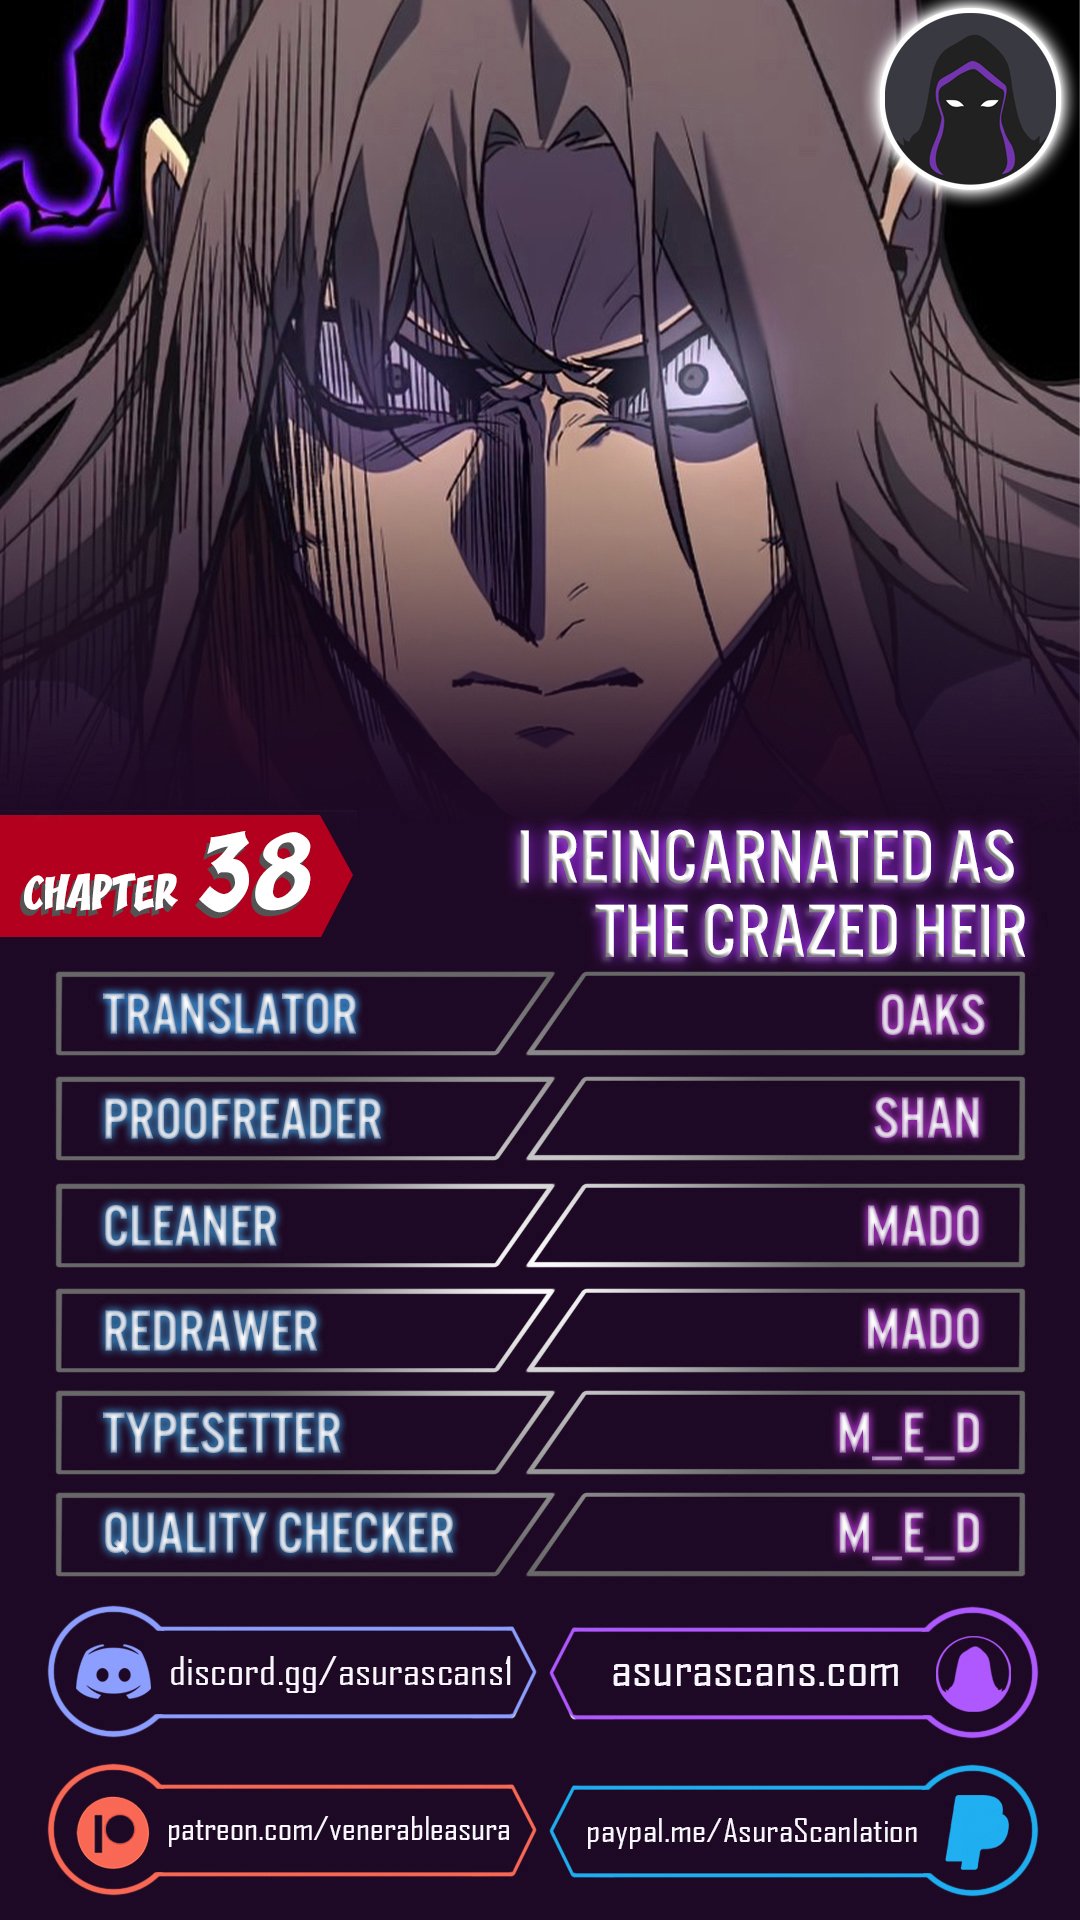 I Reincarnated As The Crazed Heir - Chapter 19287 - Image 1